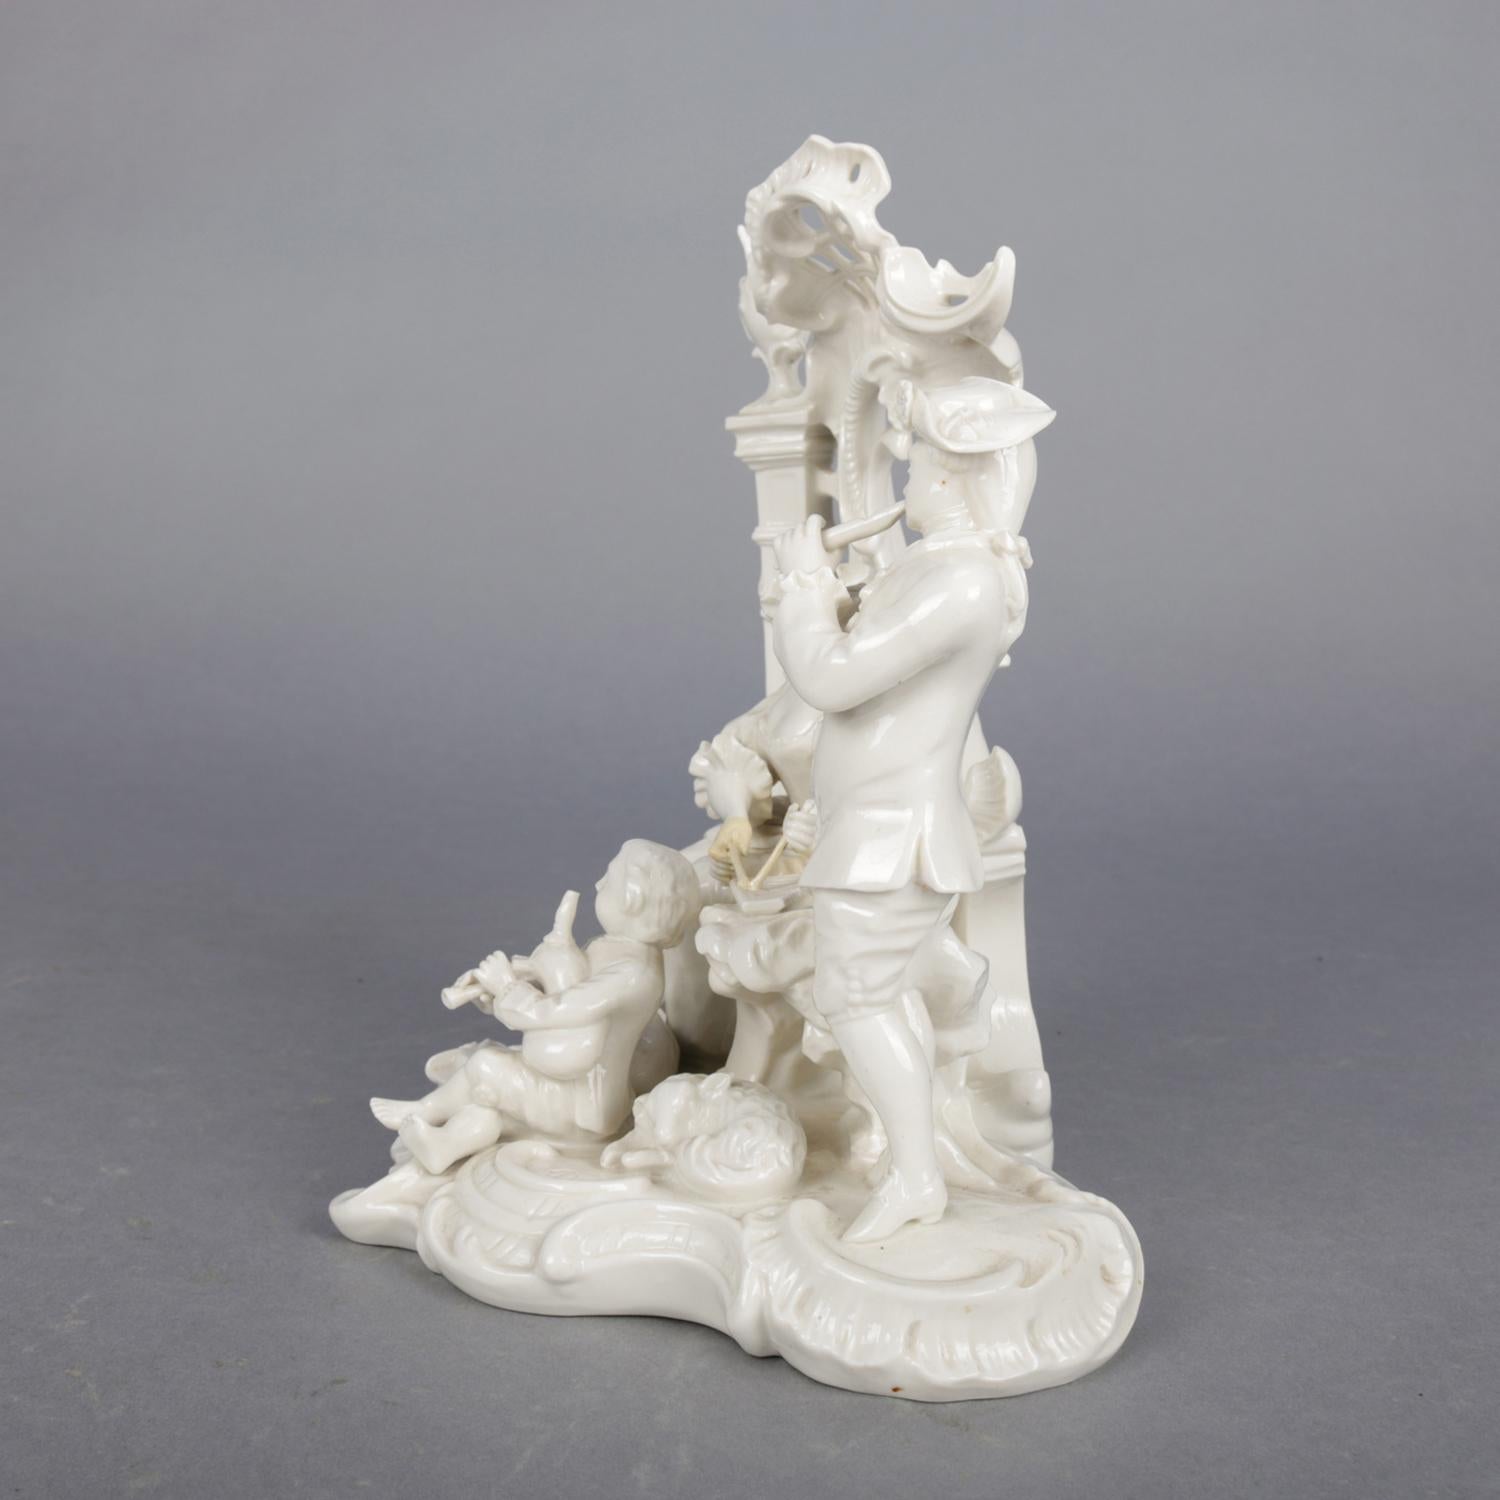 Victorian Antique German Figural Blanc de Chine Family Grouping, Parlor Music Scene